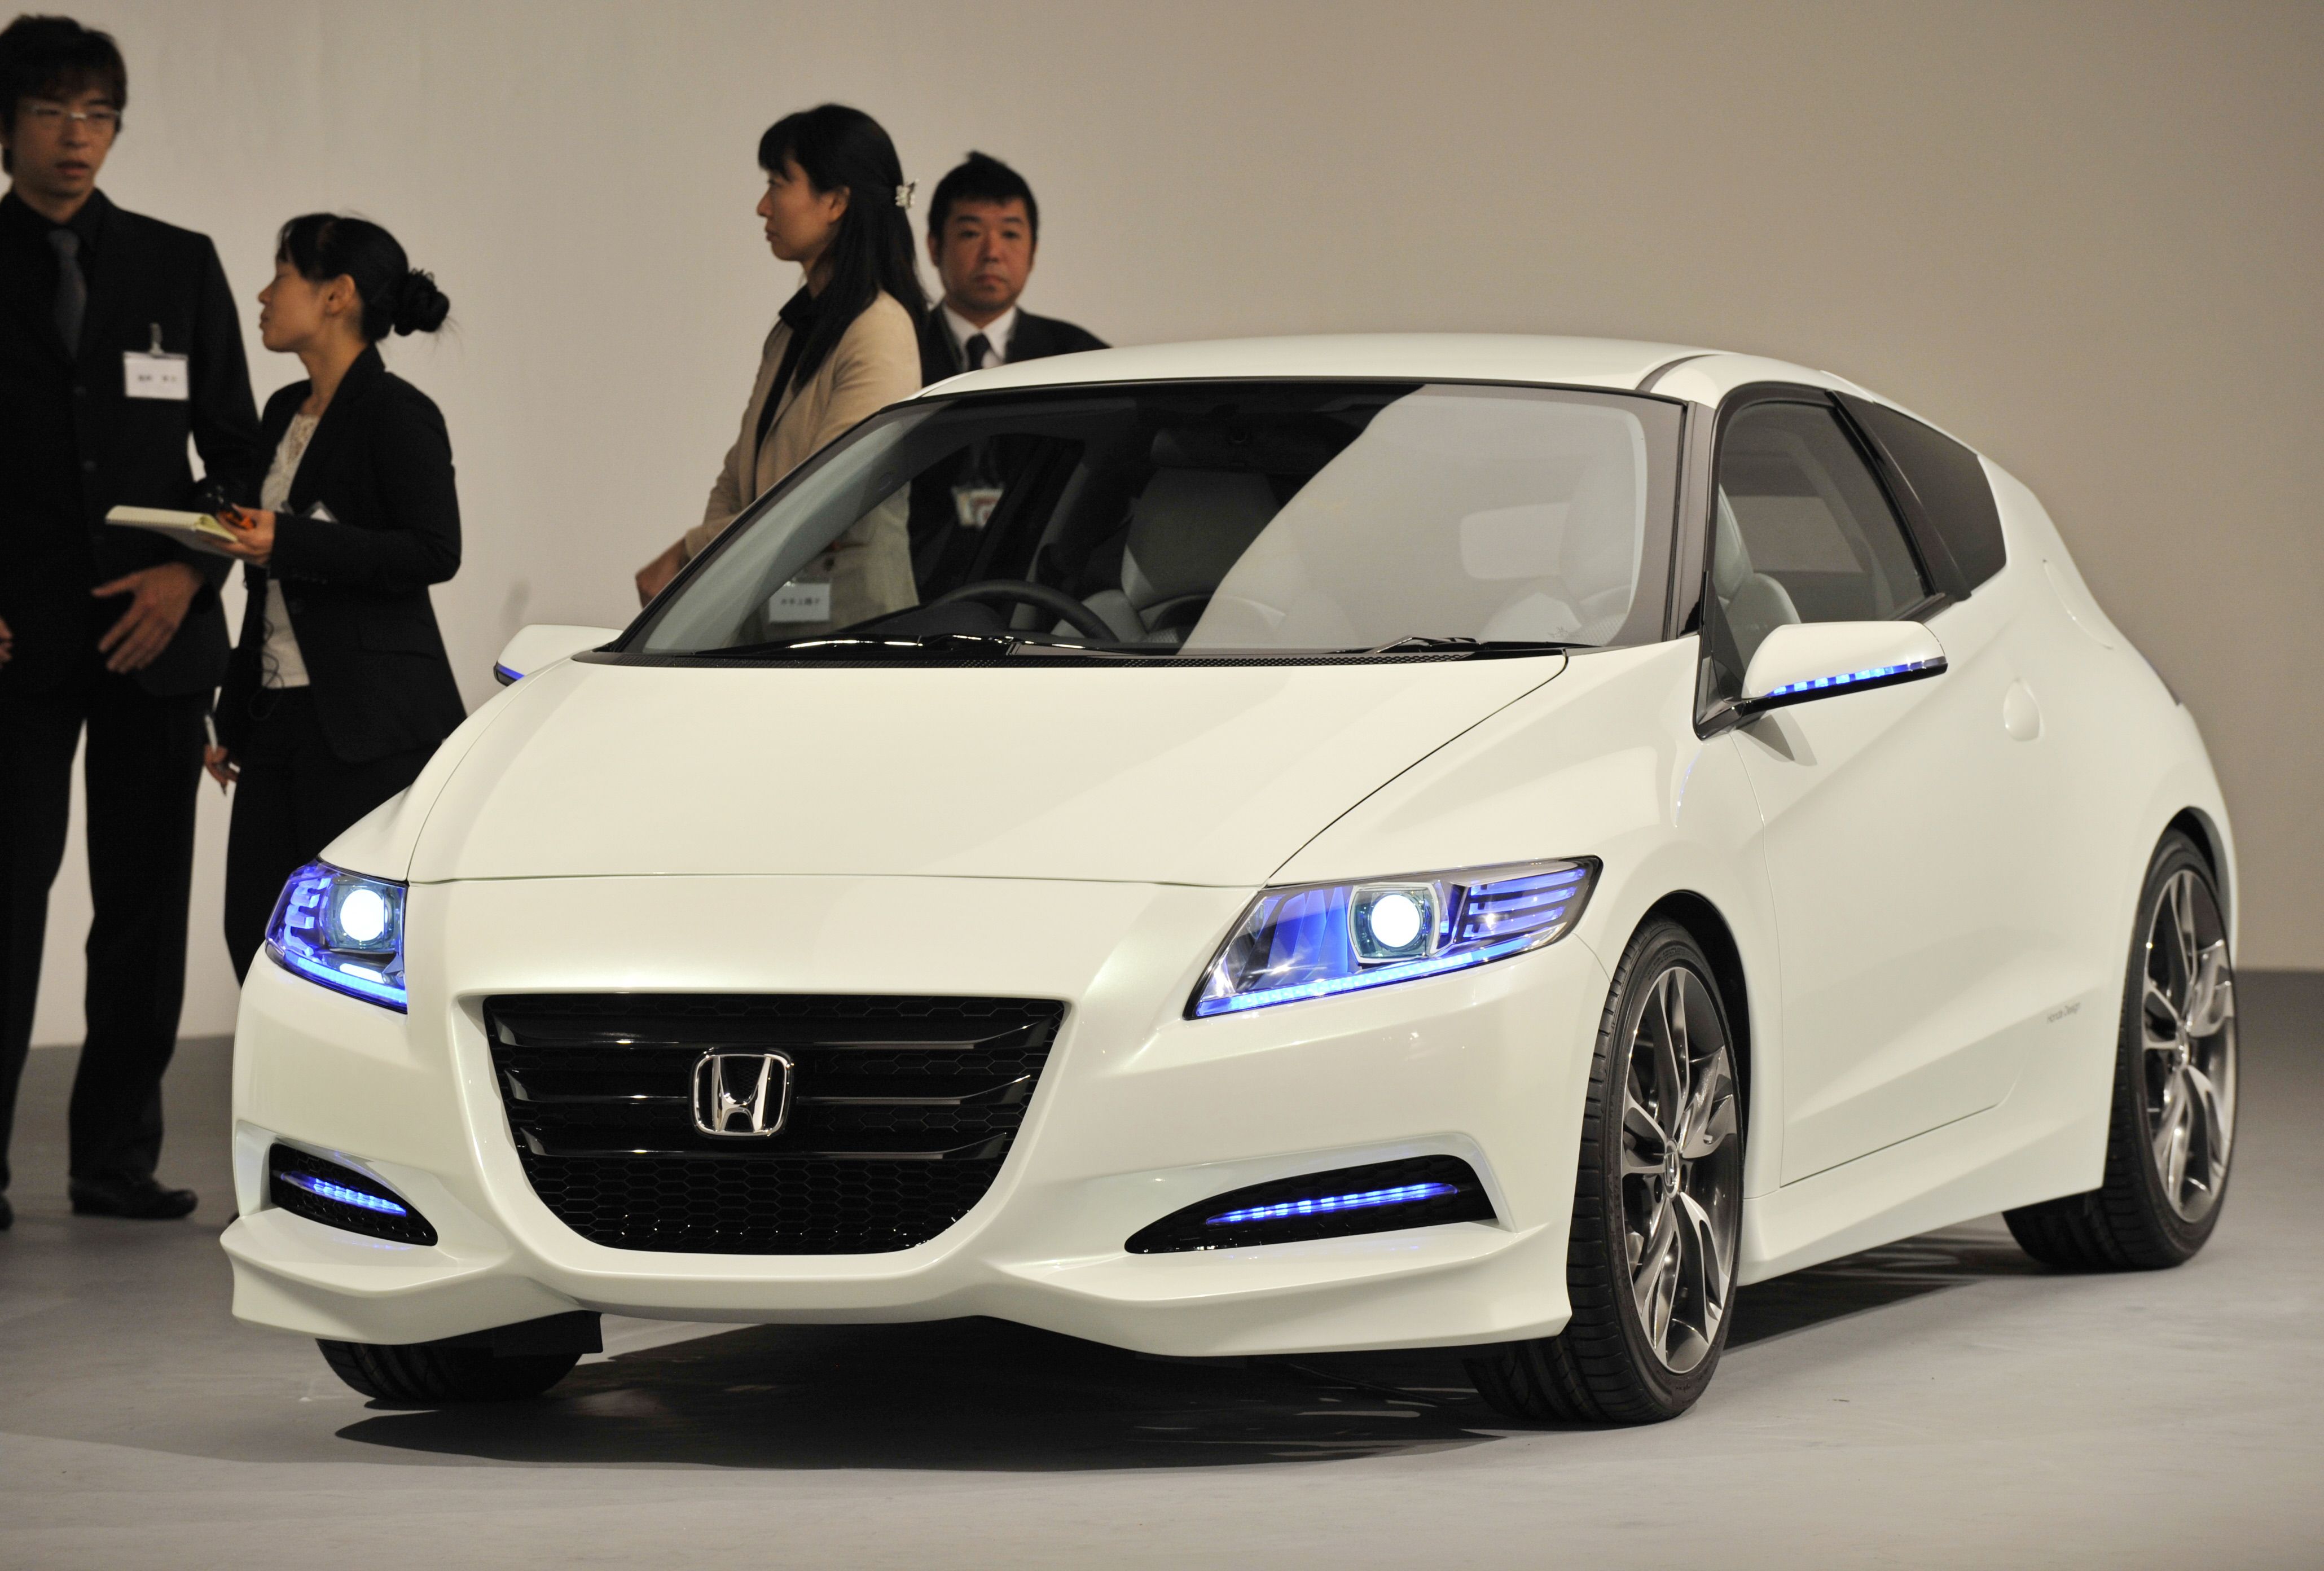 2016 Honda CR-Z Prices, Reviews, and Photos - MotorTrend